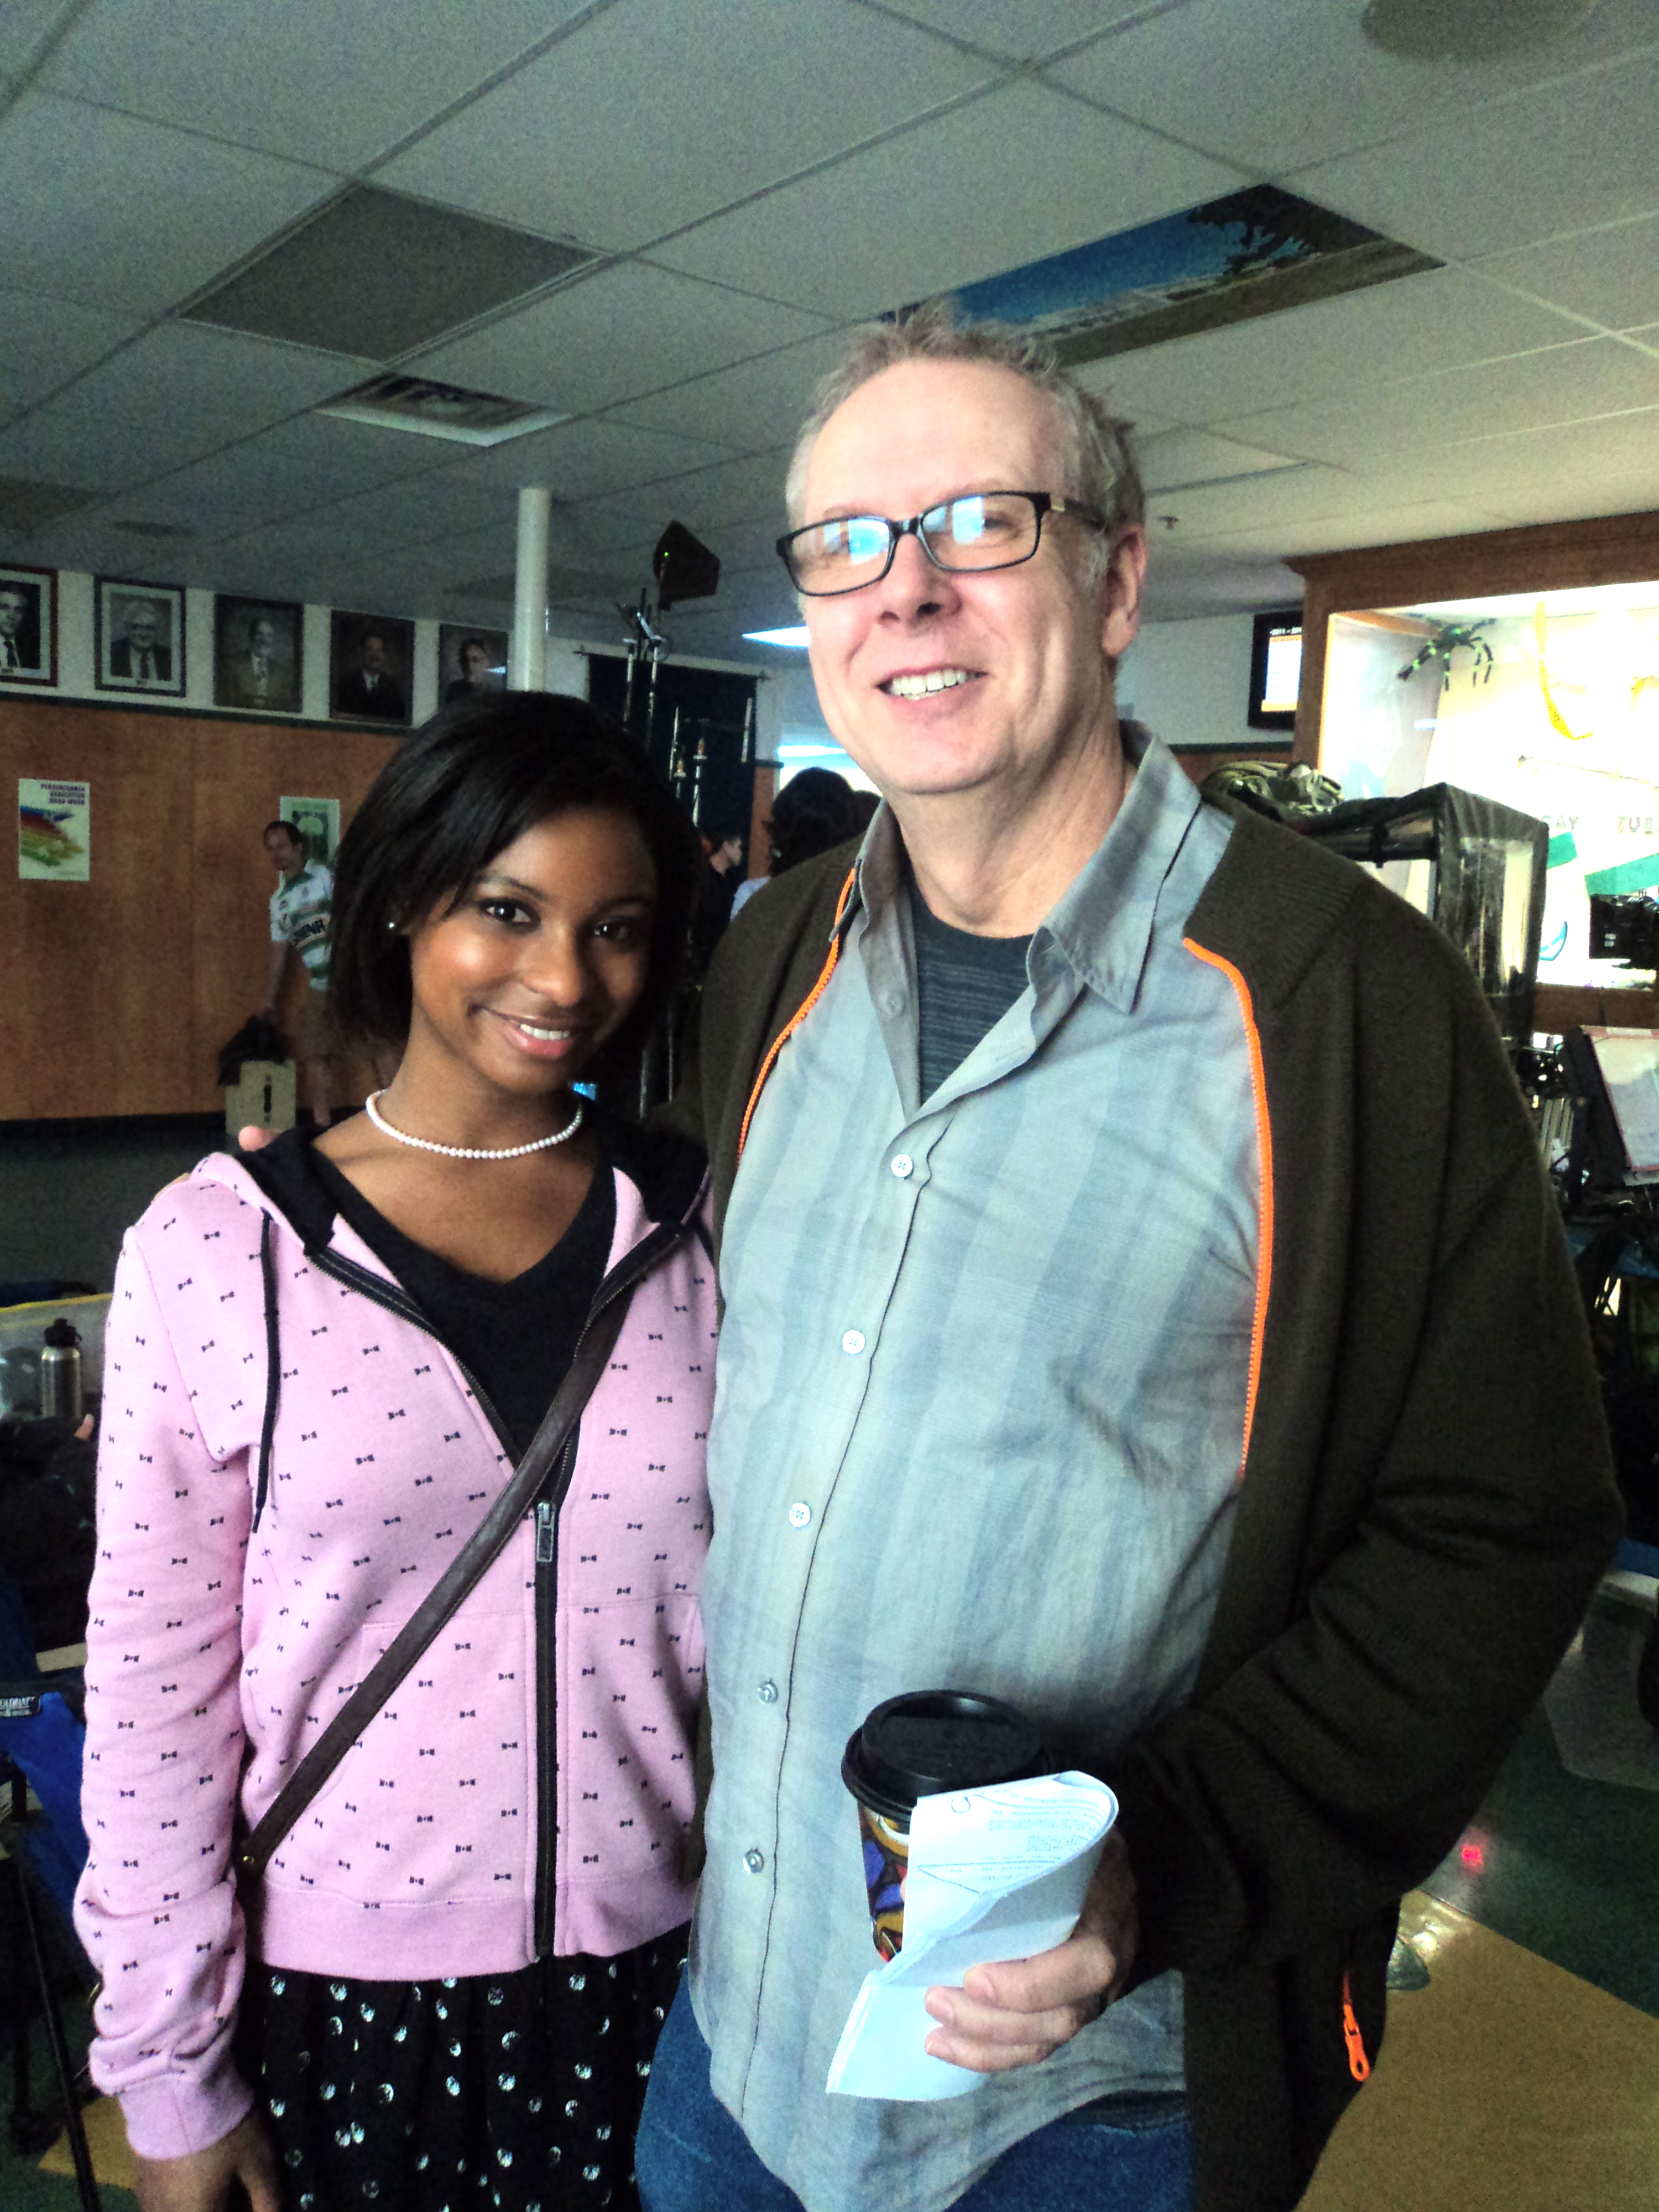 Director Norman Buckley and Heather-Claire Nortey (playing Emily) on the set of 